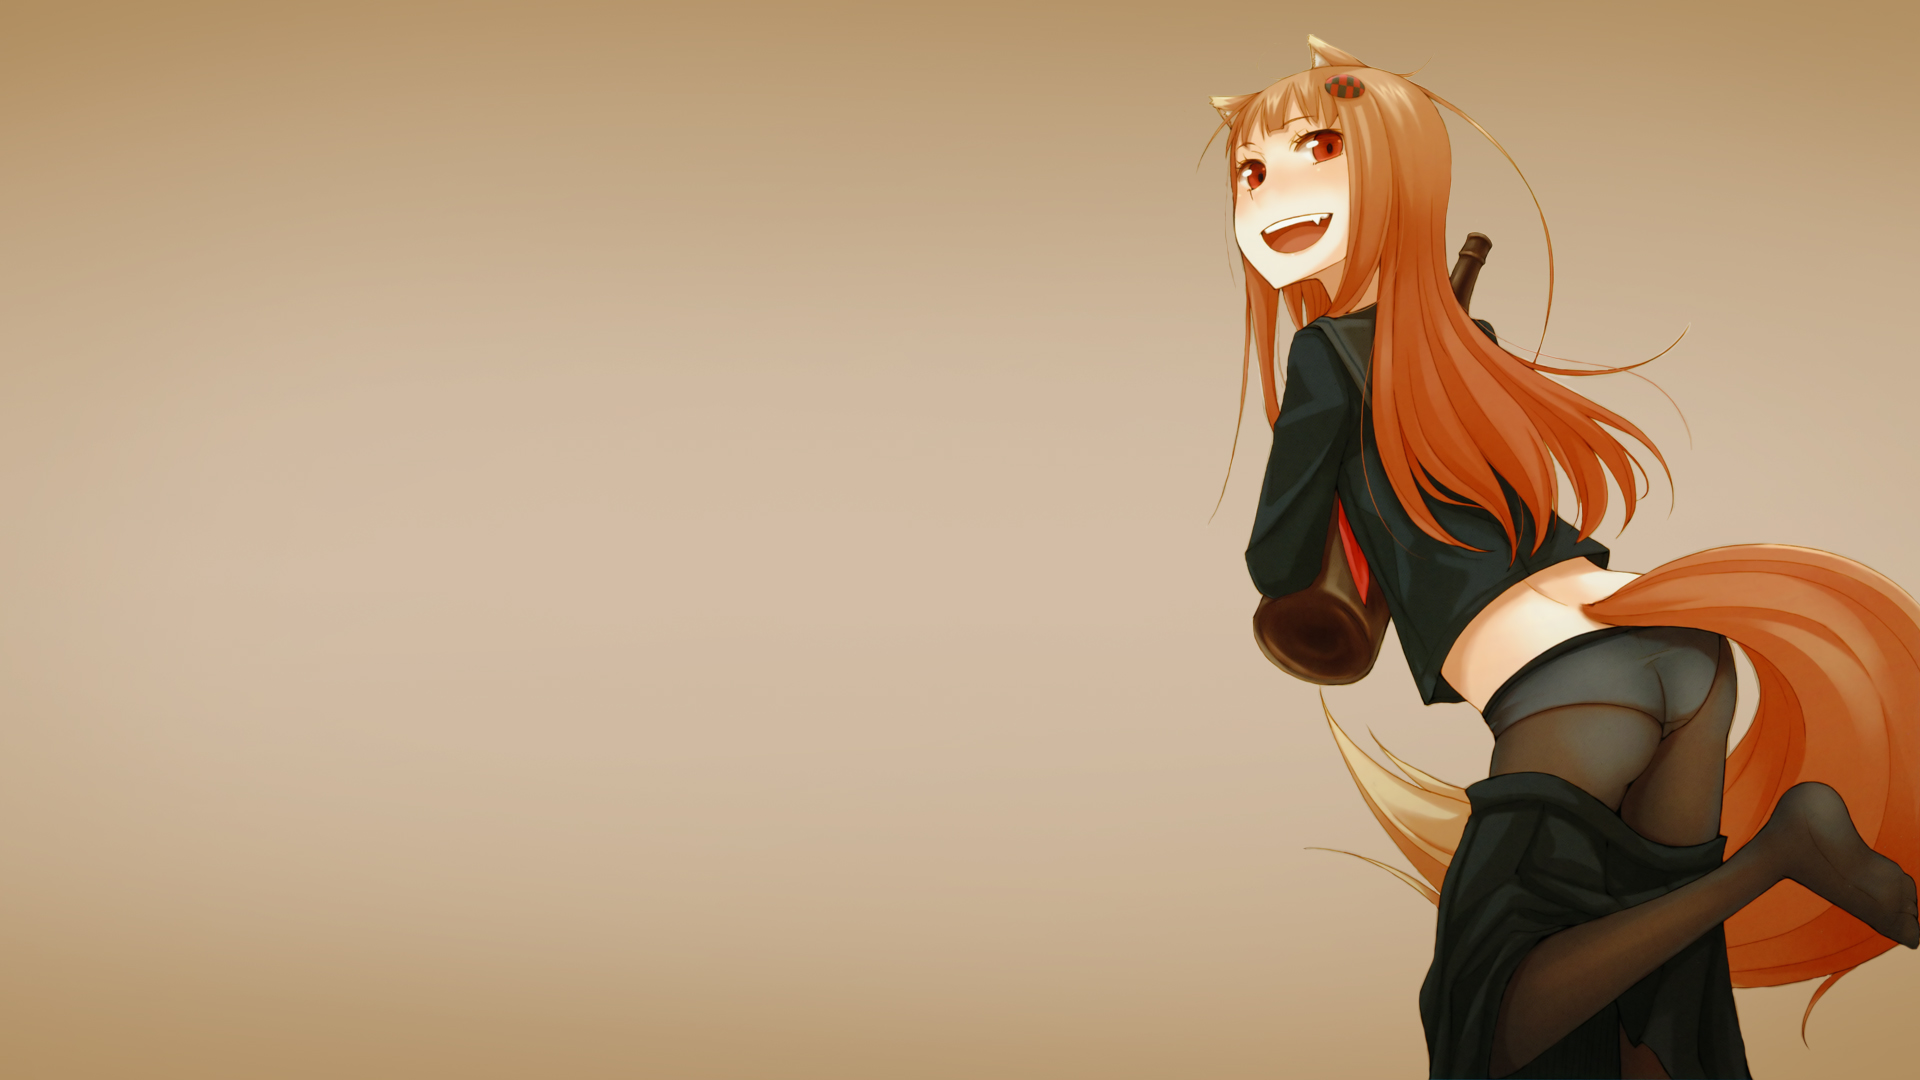 Nice Images Collection: Spice And Wolf Desktop Wallpapers